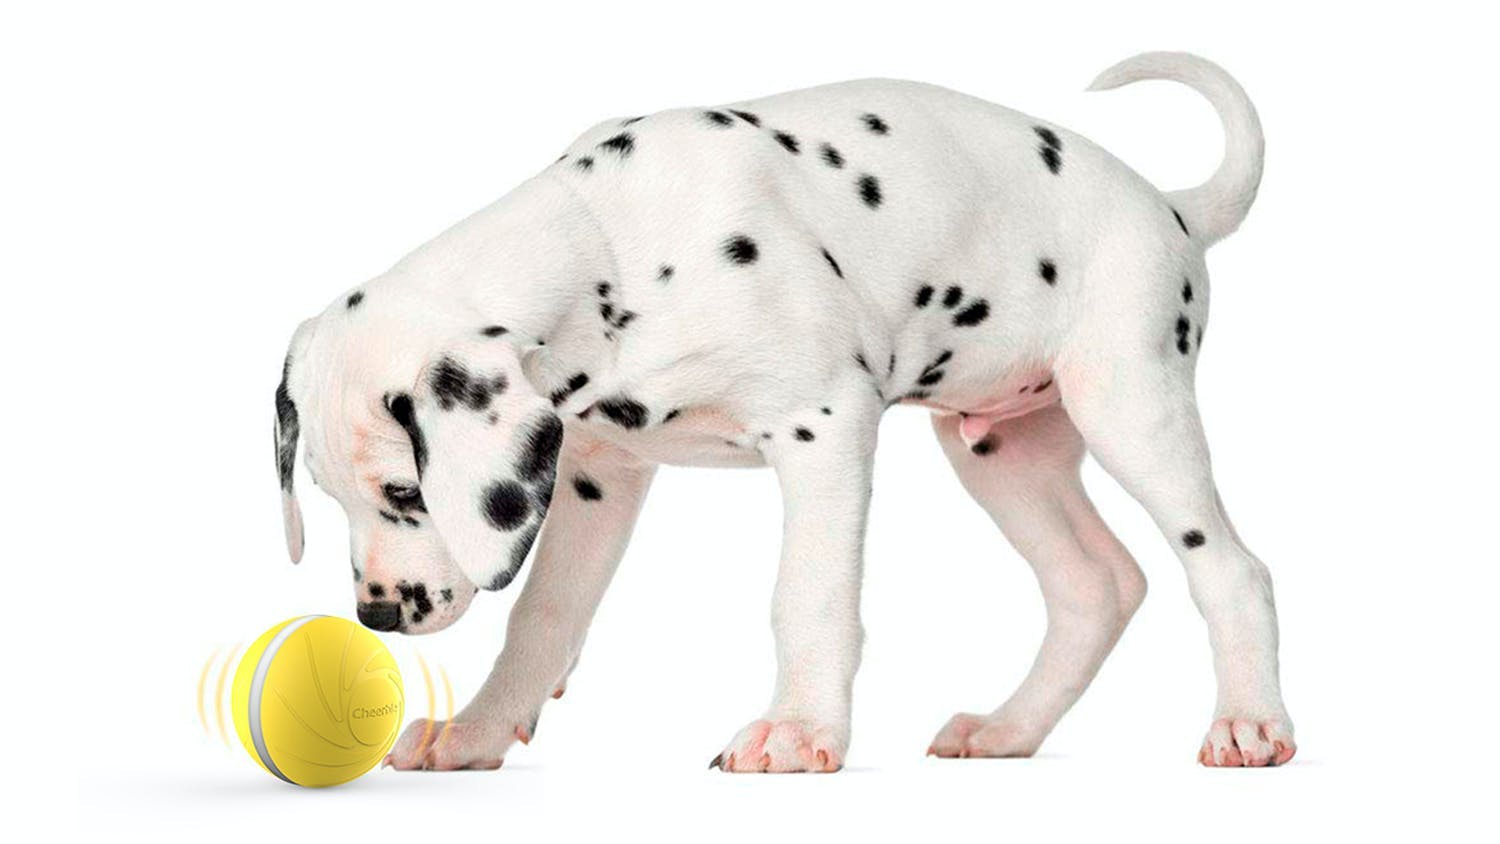 Cheerble Wicked Ball Robotic Pet Toy - Yellow